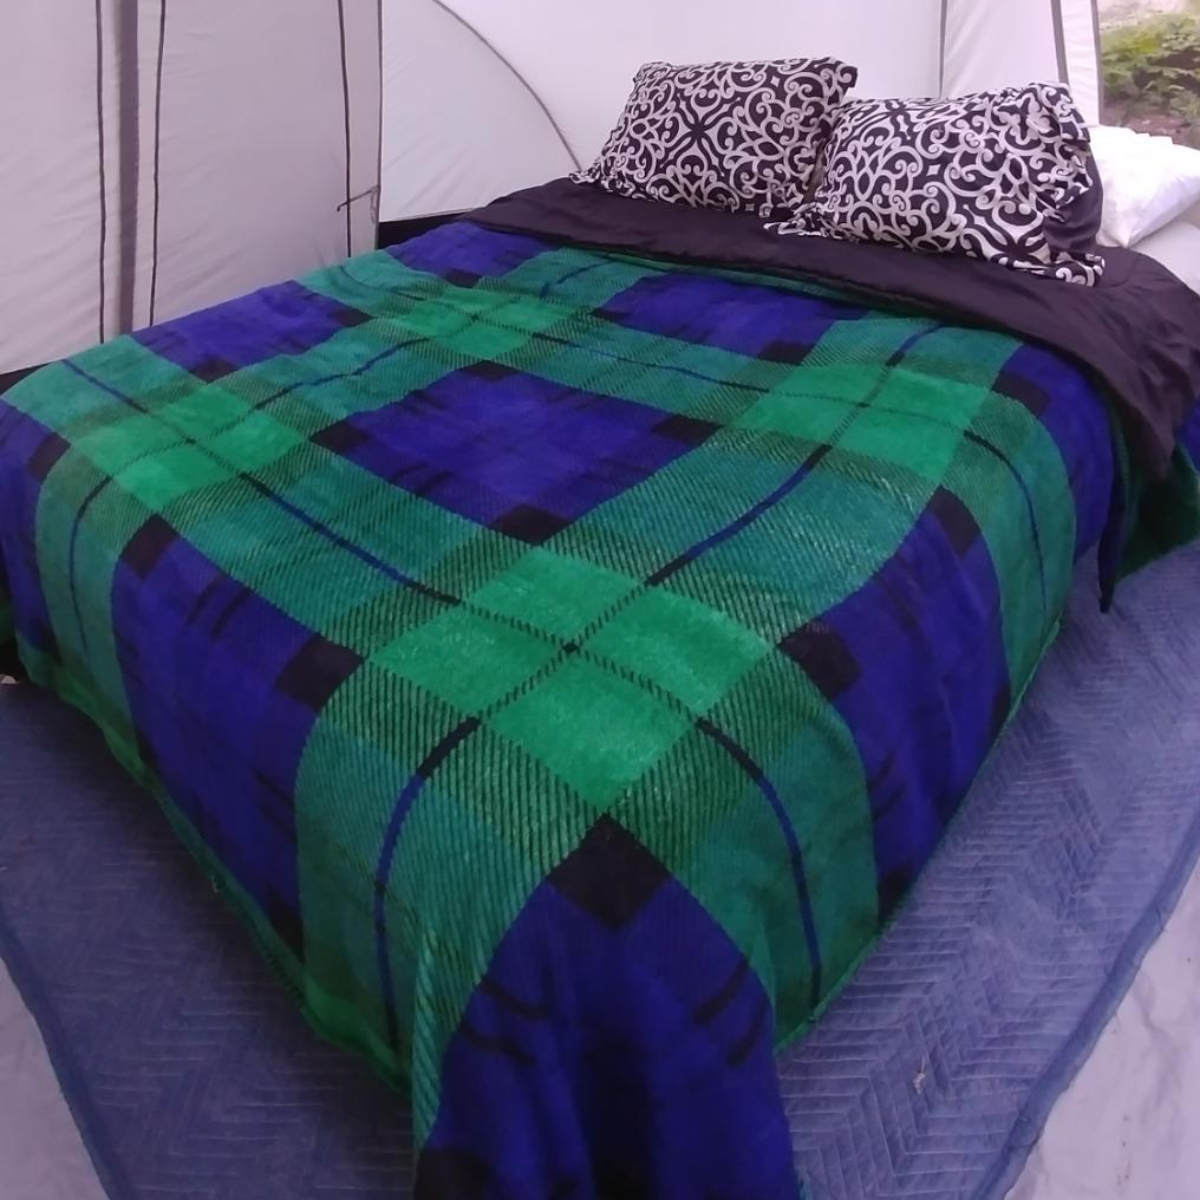 Air bed with bedding in tent